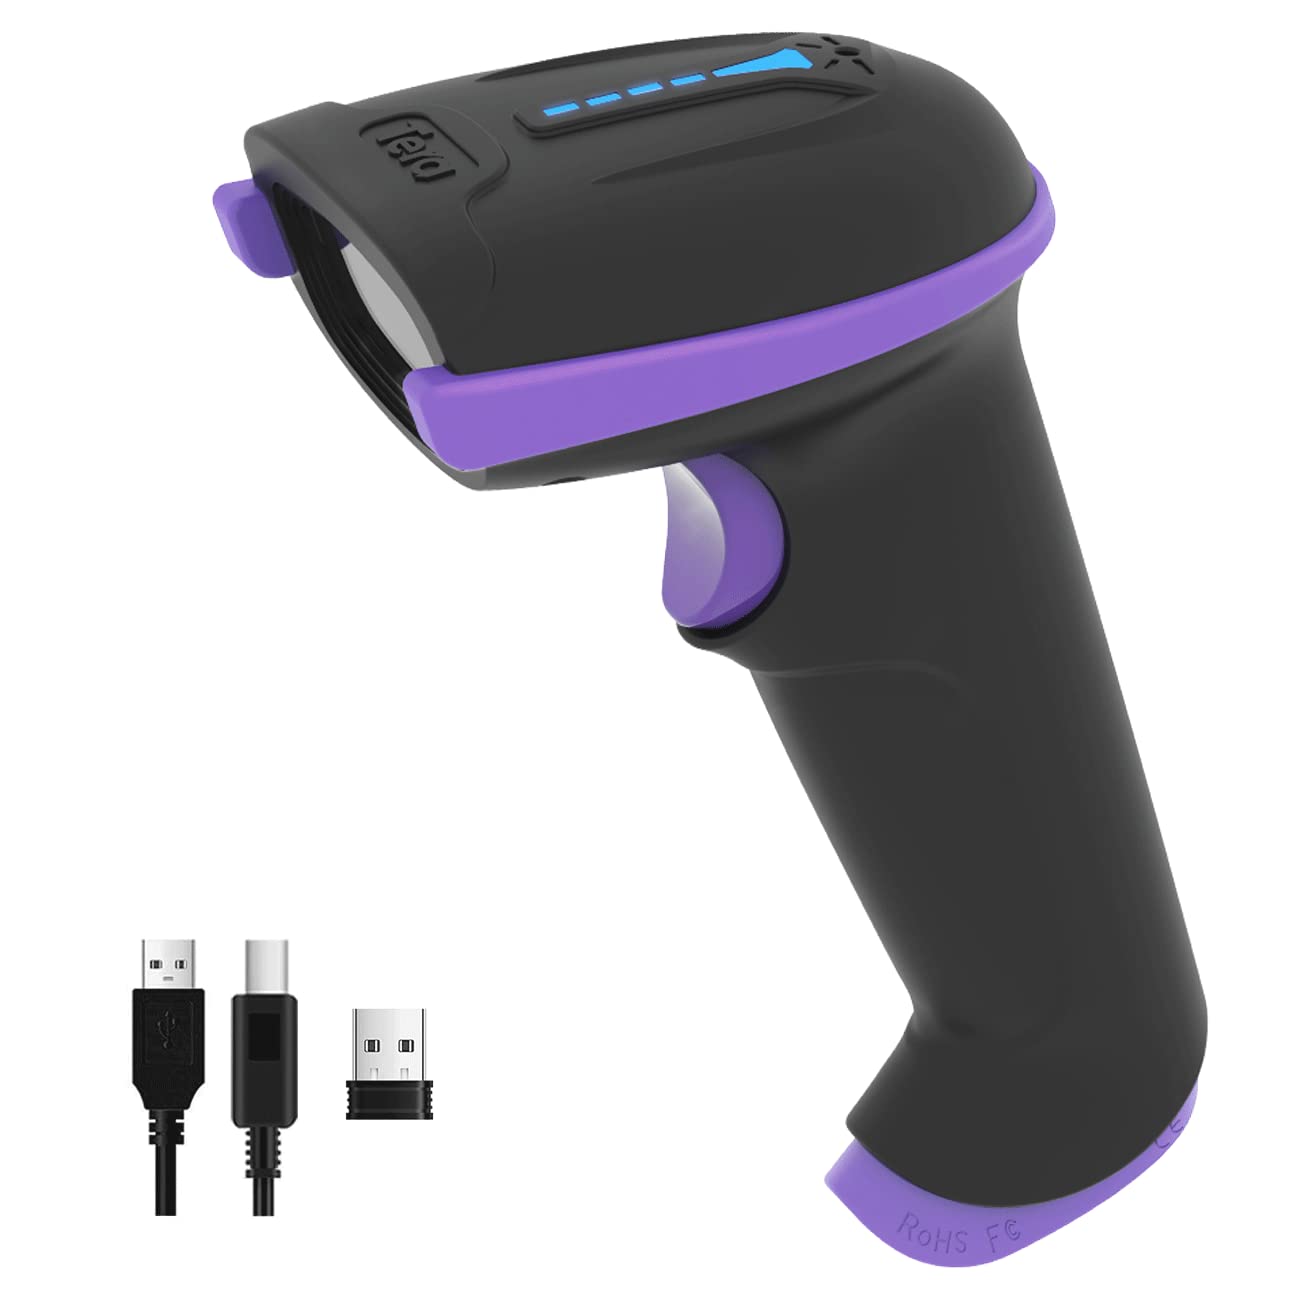 NETUM QR Code Scanner, Mini Barcode Scanner Bluetooth Compatible, Small  Portable USB 1D 2D Bar Code Scanner for Inventory, 2.4G Cordless Image  Reader